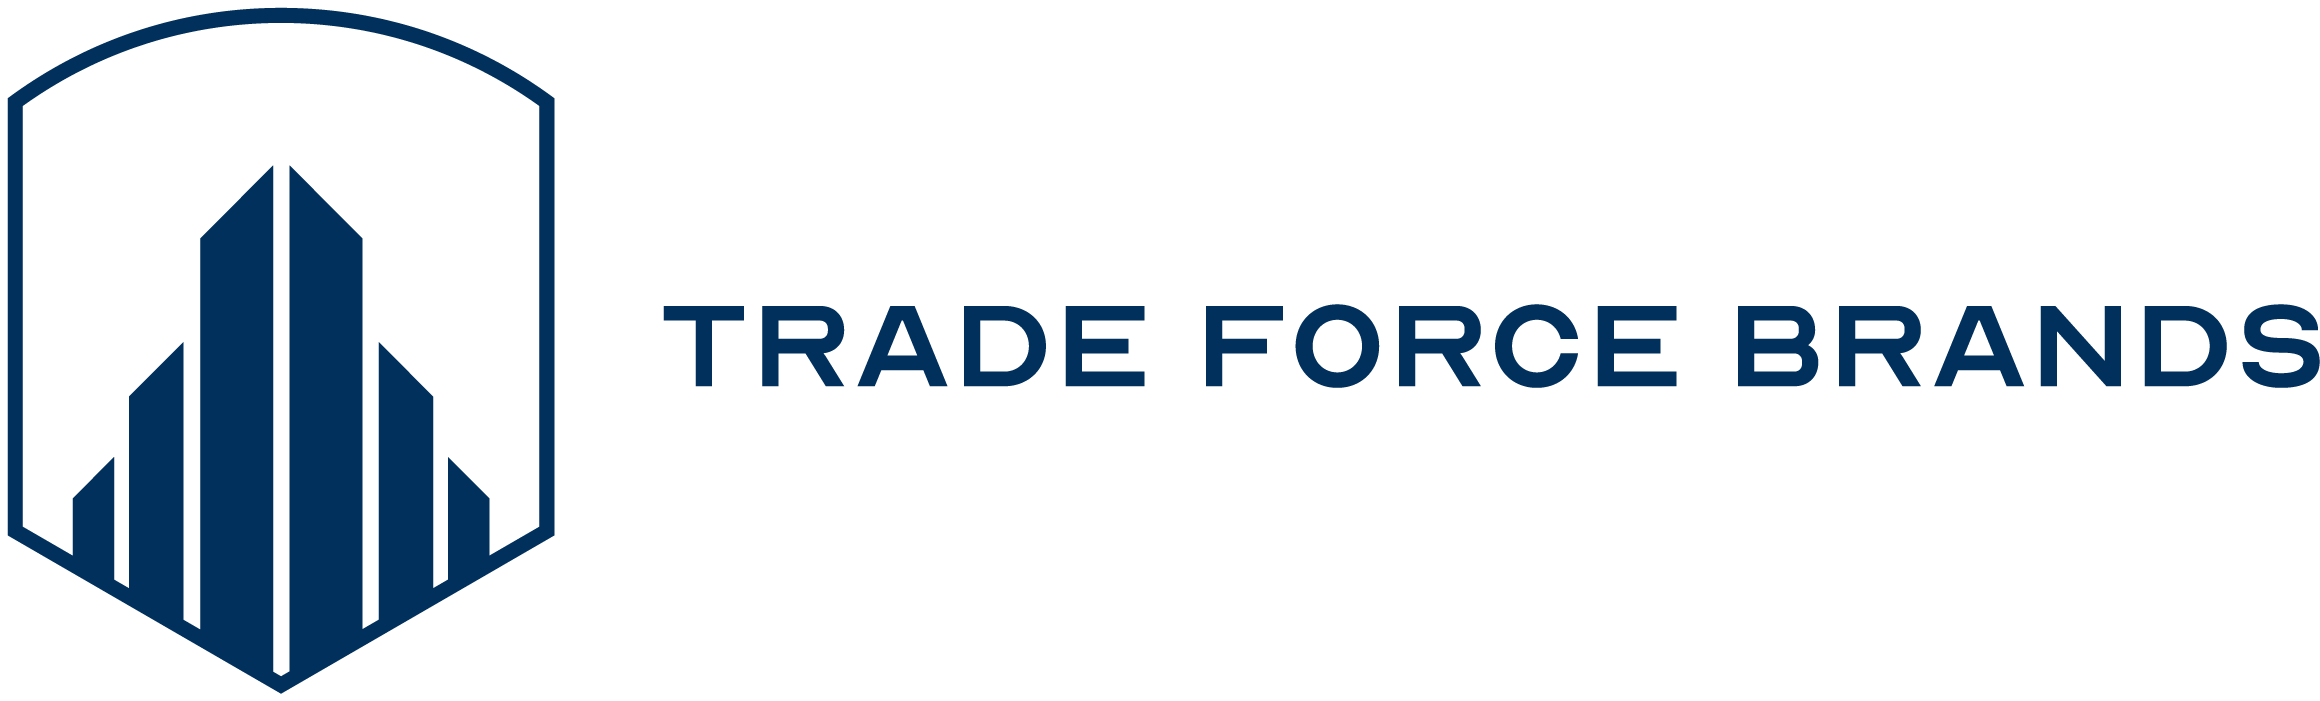 TRADE FORCE BRANDS